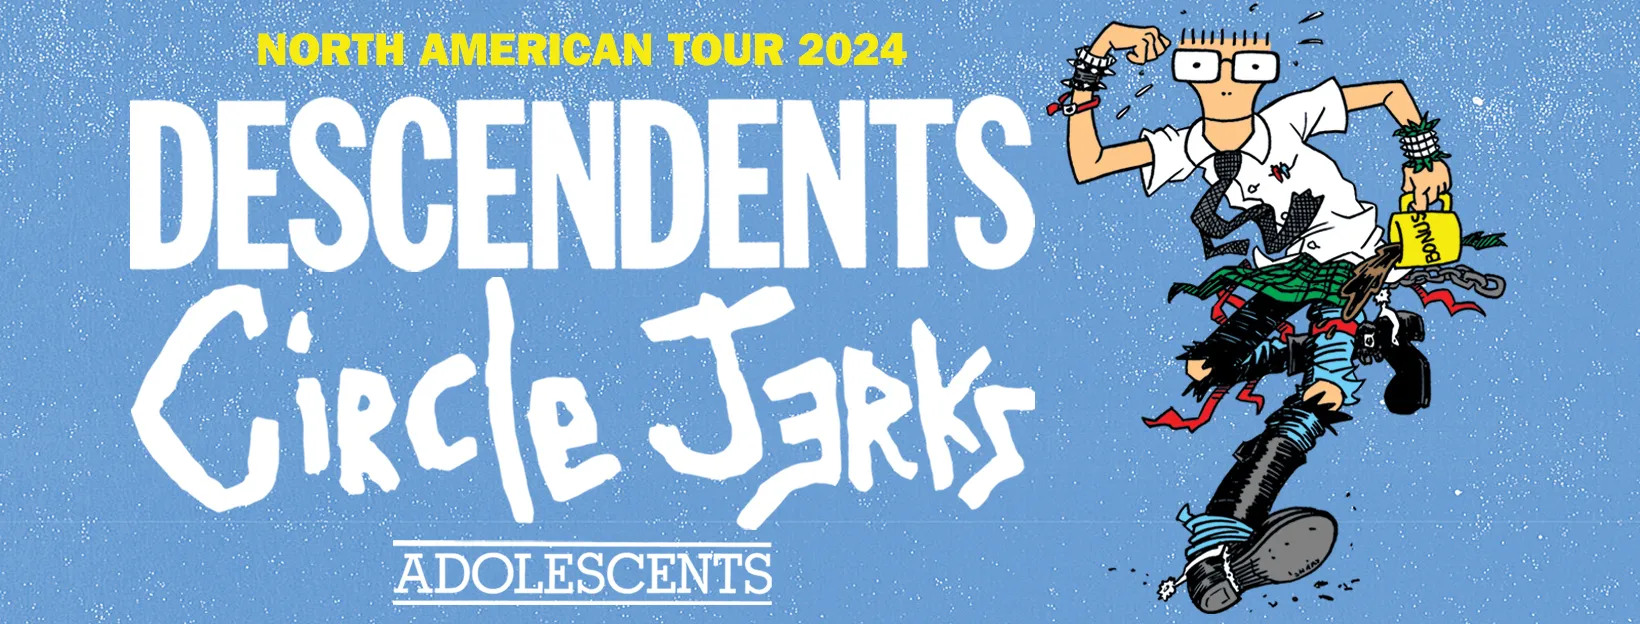 The Descendents &amp; Circle Jerks